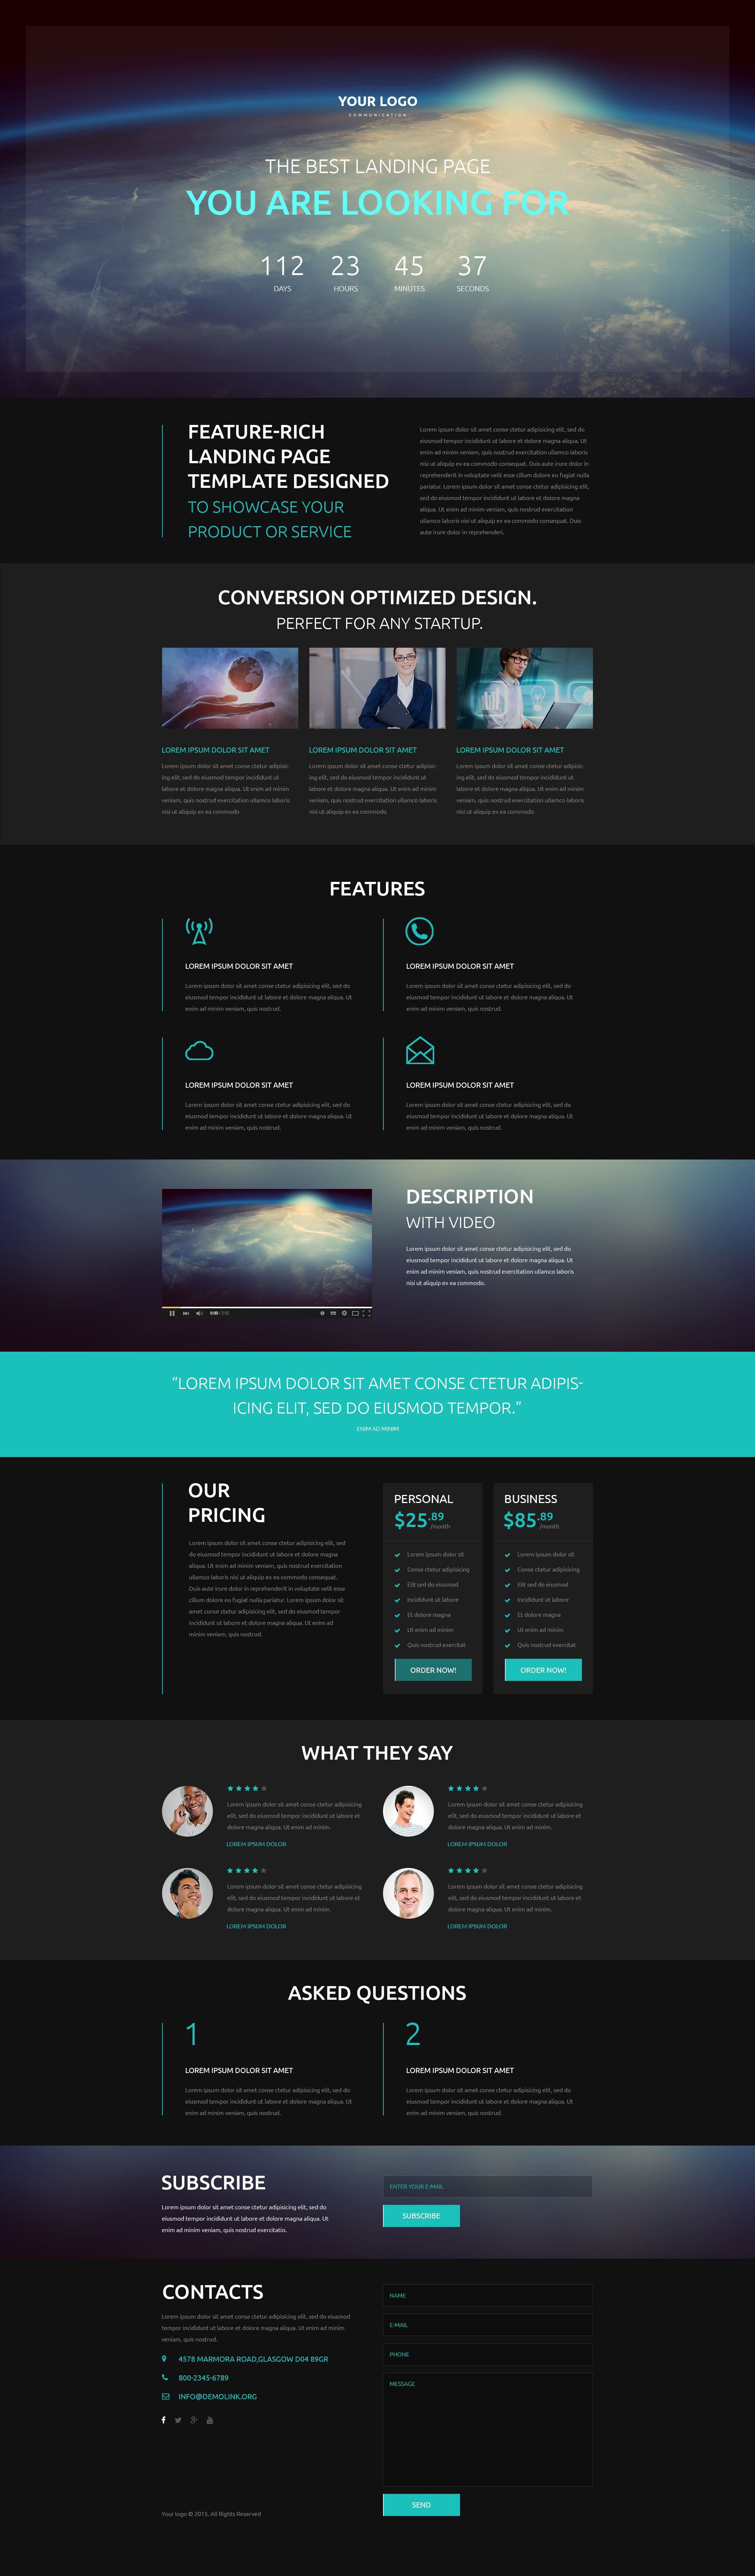 Communications Responsive Landing Page Template